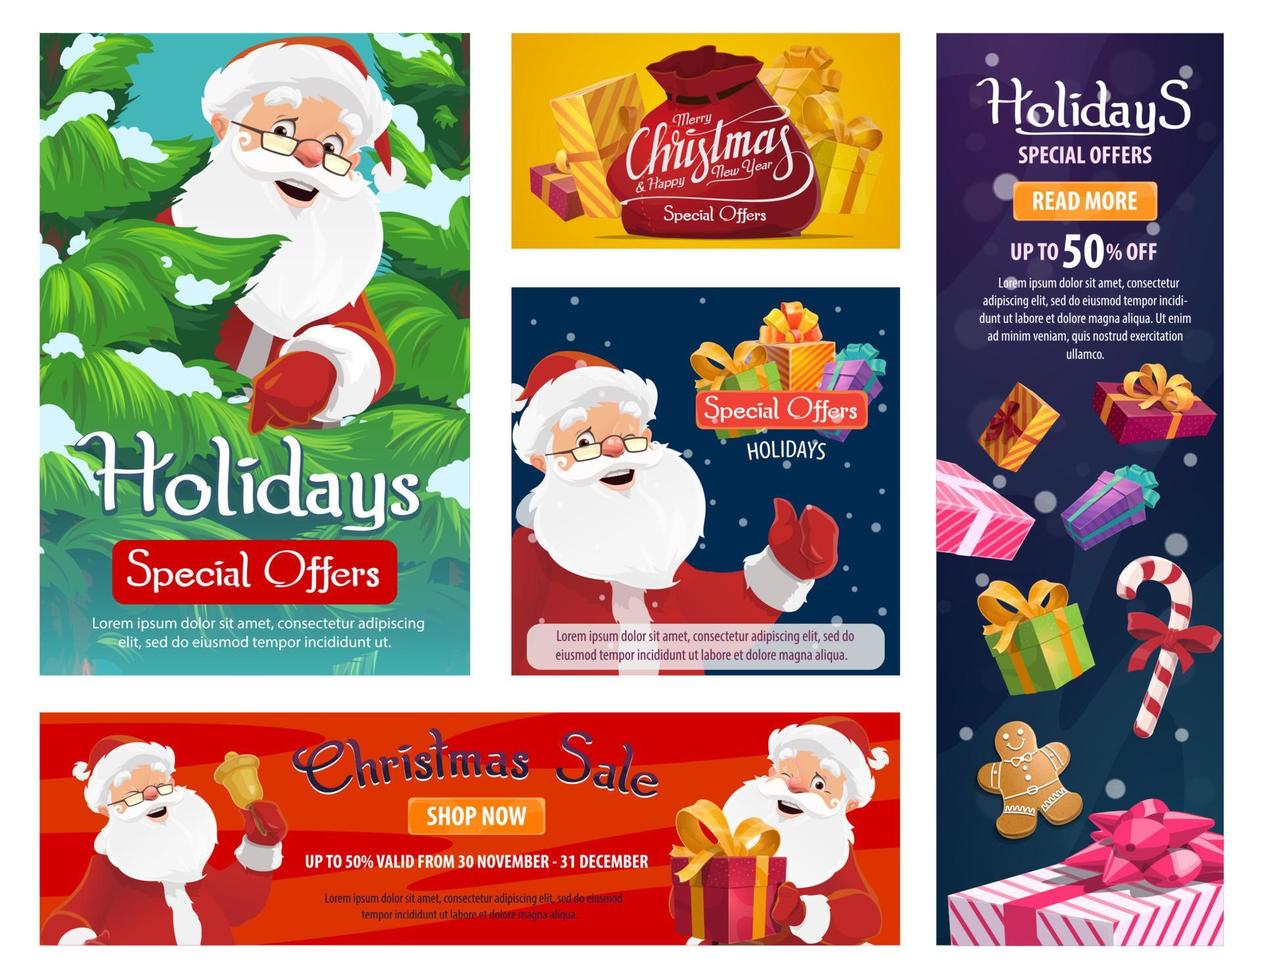 Christmas sale, Santa gifts store special offer vector